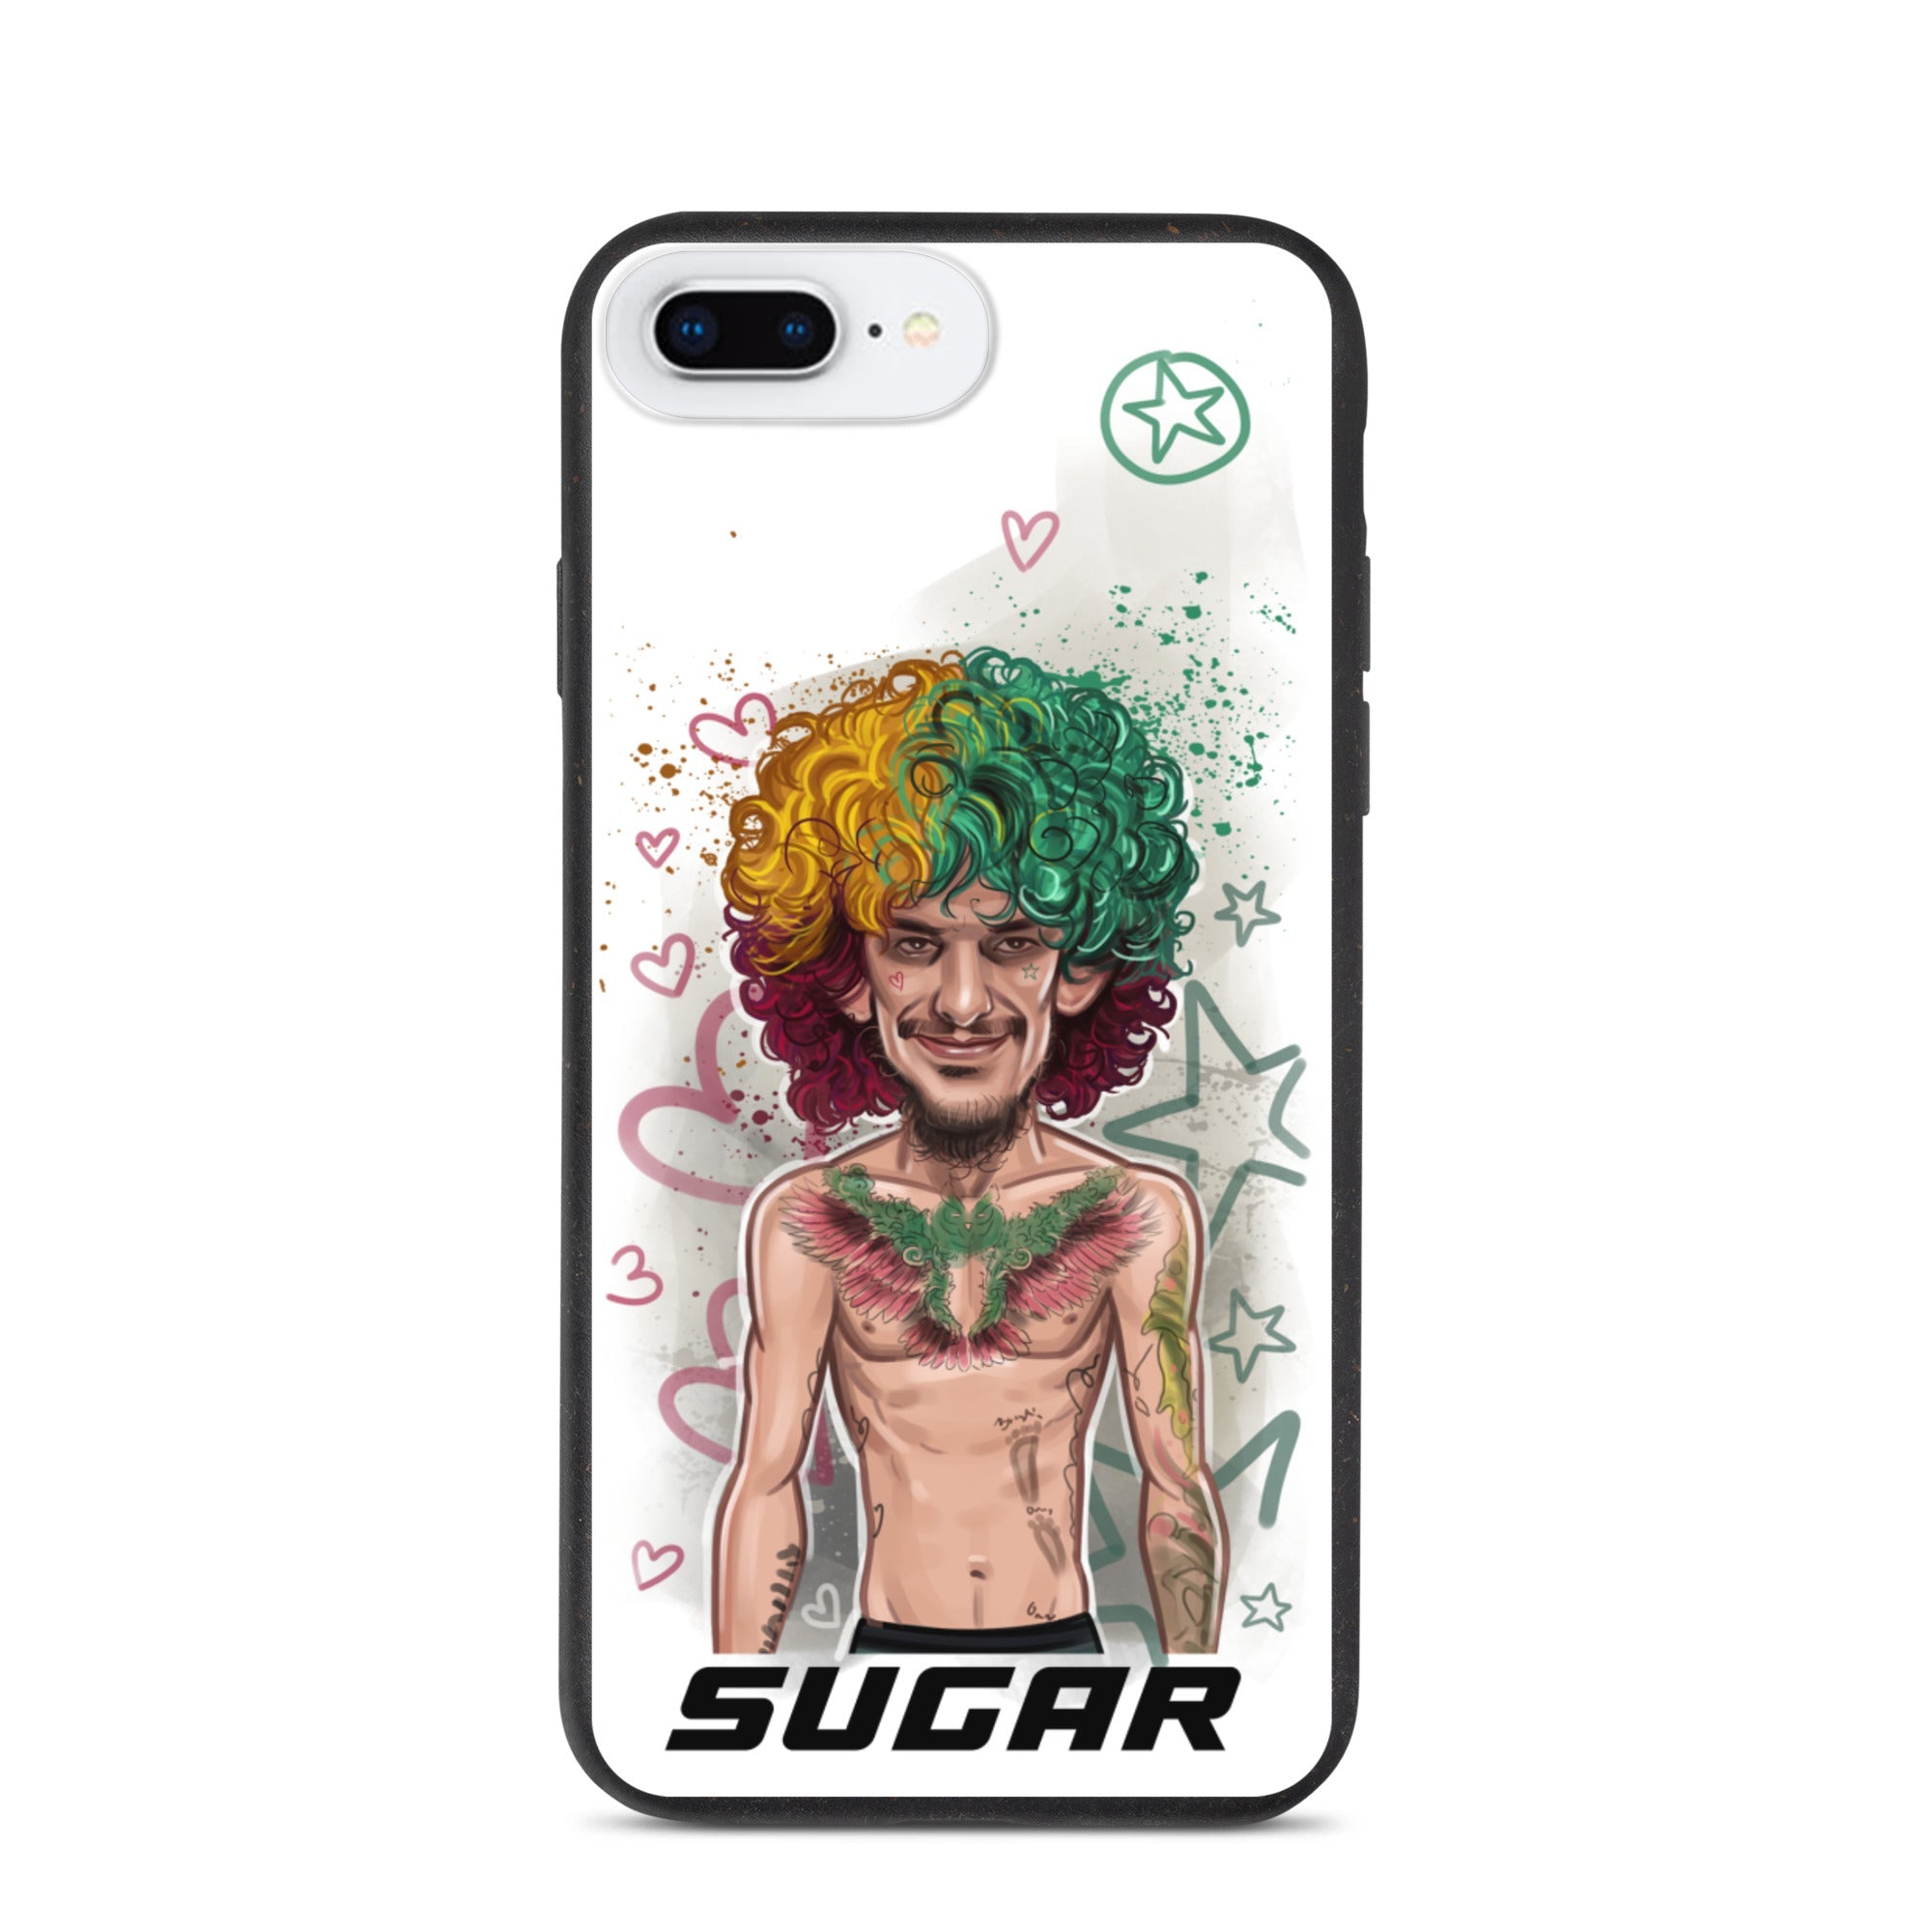 "Sugar" Sean O'Malley Speckled iPhone Case (Joker Version) Mobile Phone Cases